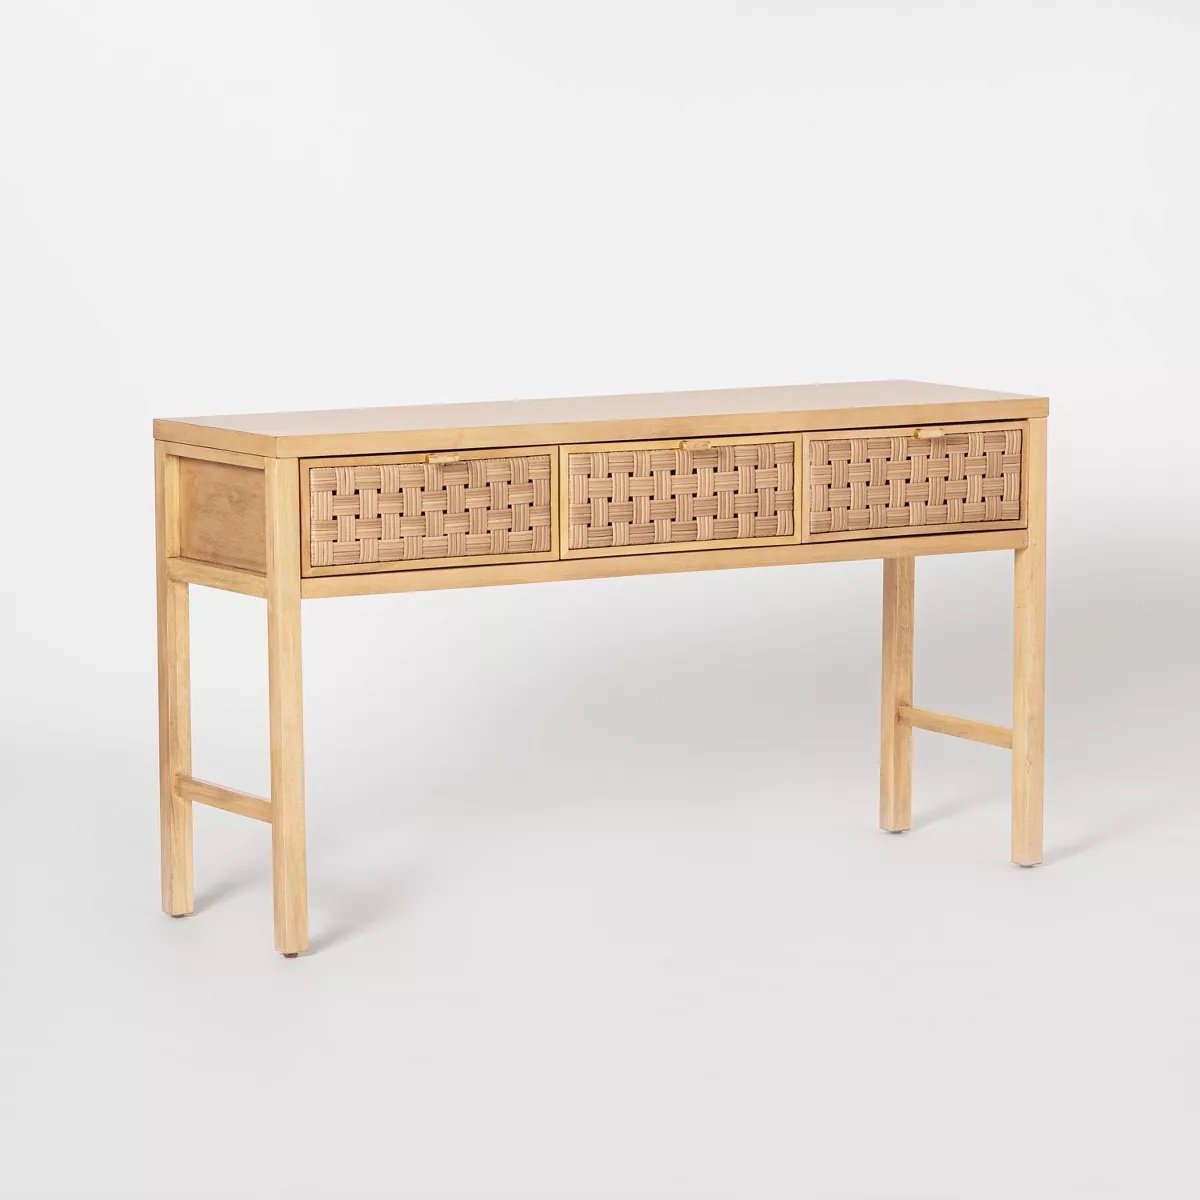 Palmdale Woven Drawer Console - $350 - Target